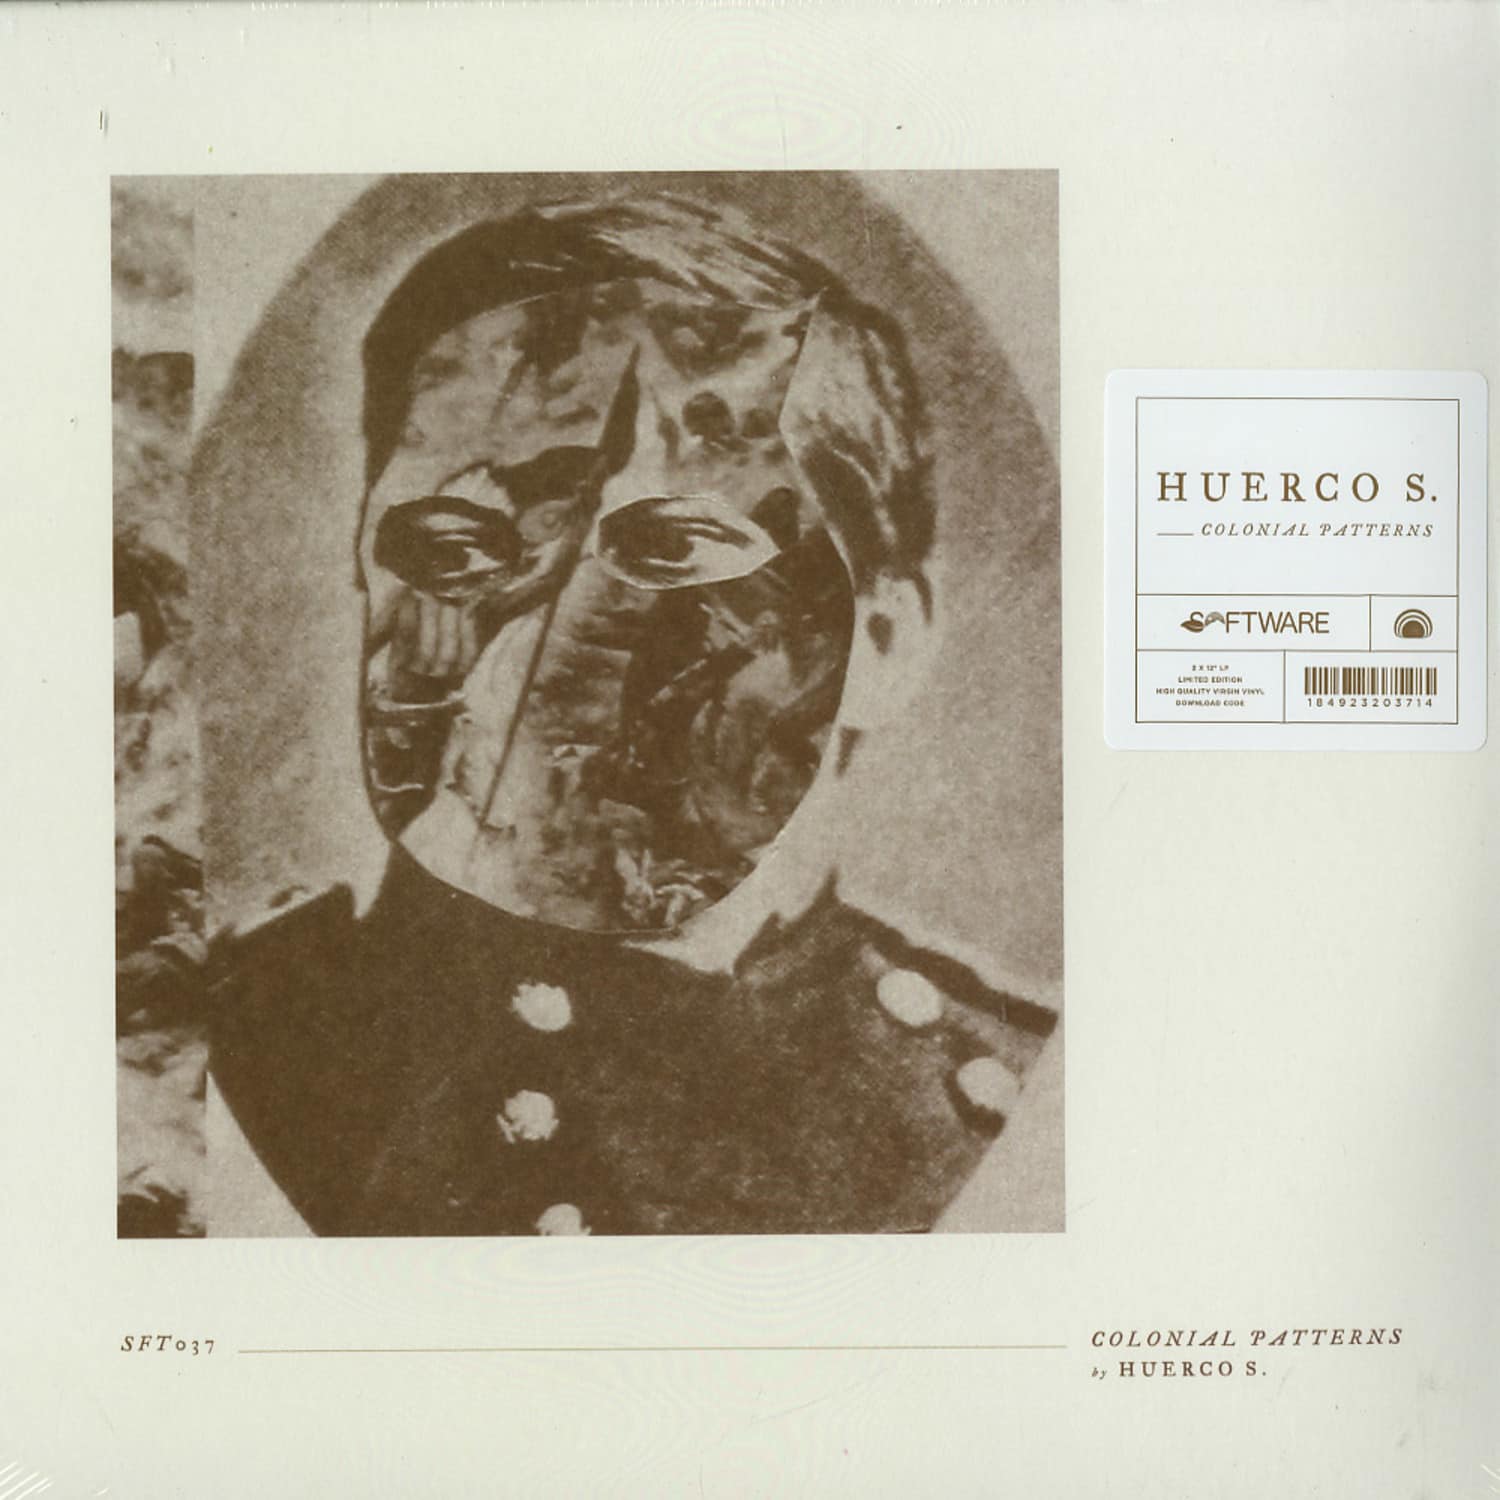 Huerco S - COLONIAL PATTERNS 